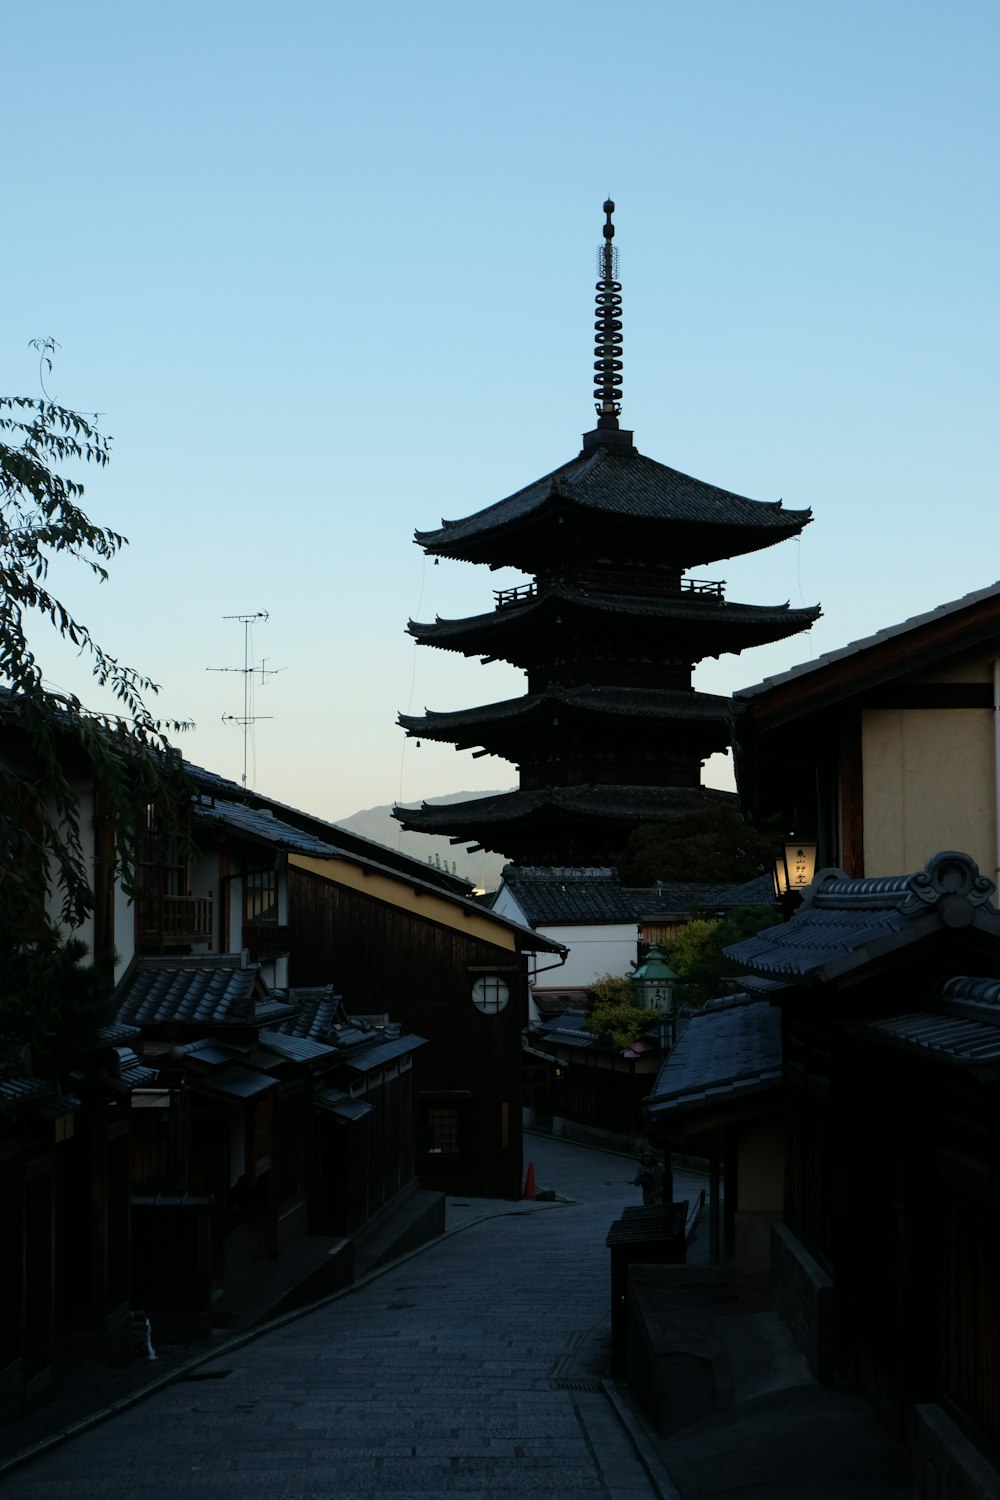 a tall pagoda tower towering over a city